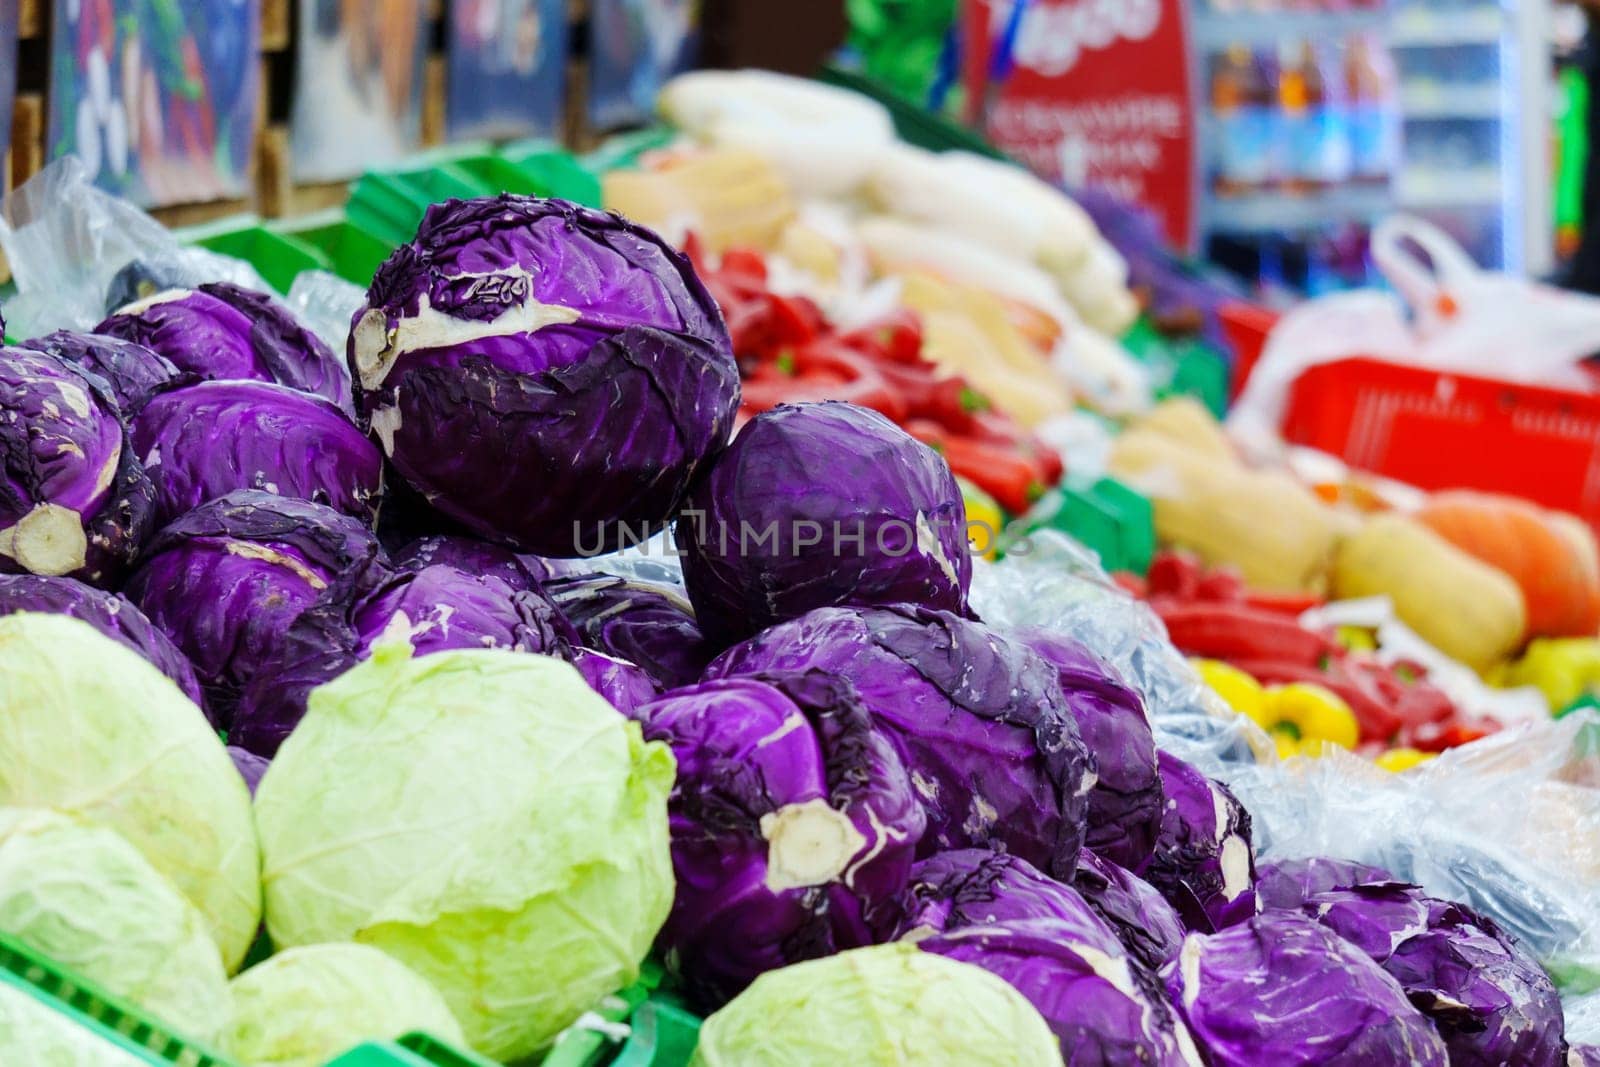 Purple and green cabbages takes center stage in this colorful snapshot of daily life at a city farmers market.